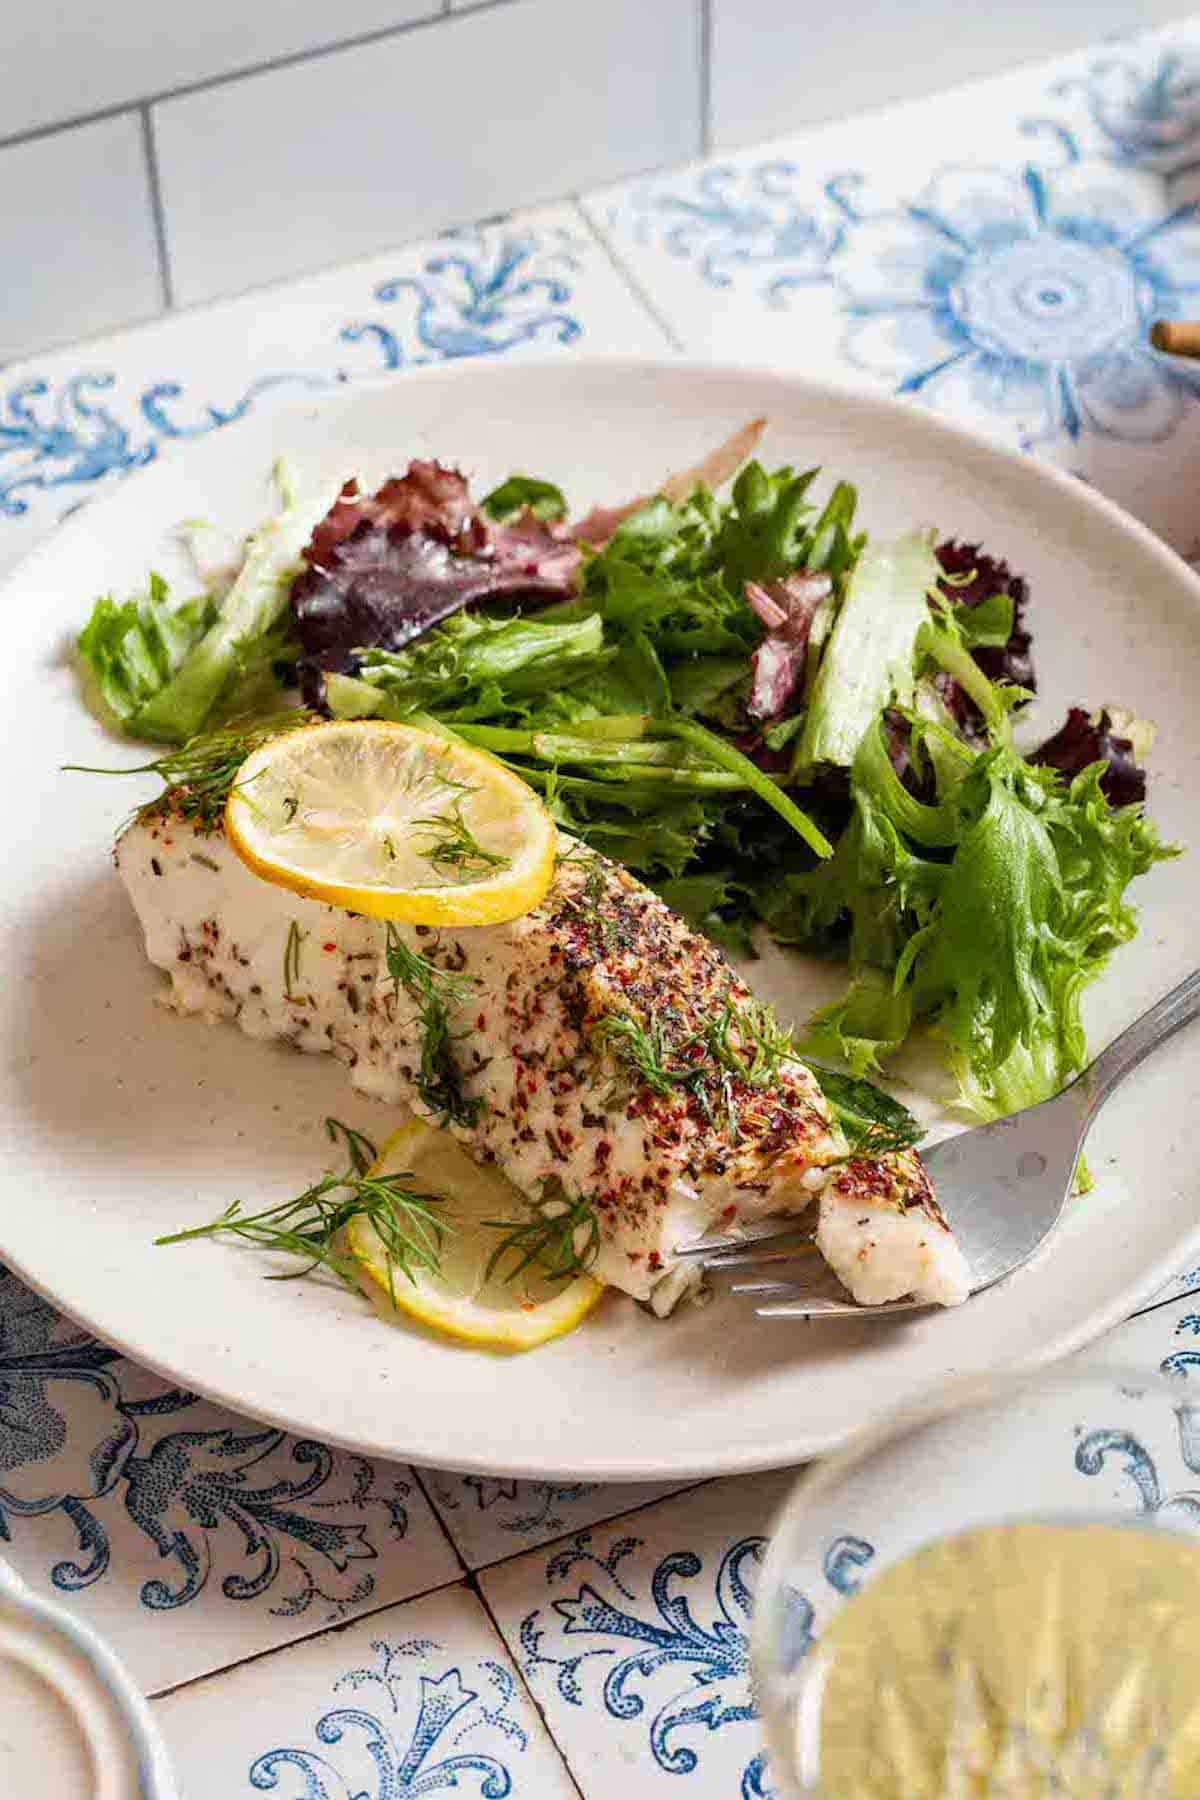 A baked halibut fillet garnished with lemon and dill on a plate with a salad and a fork with a bite of halibut on it.